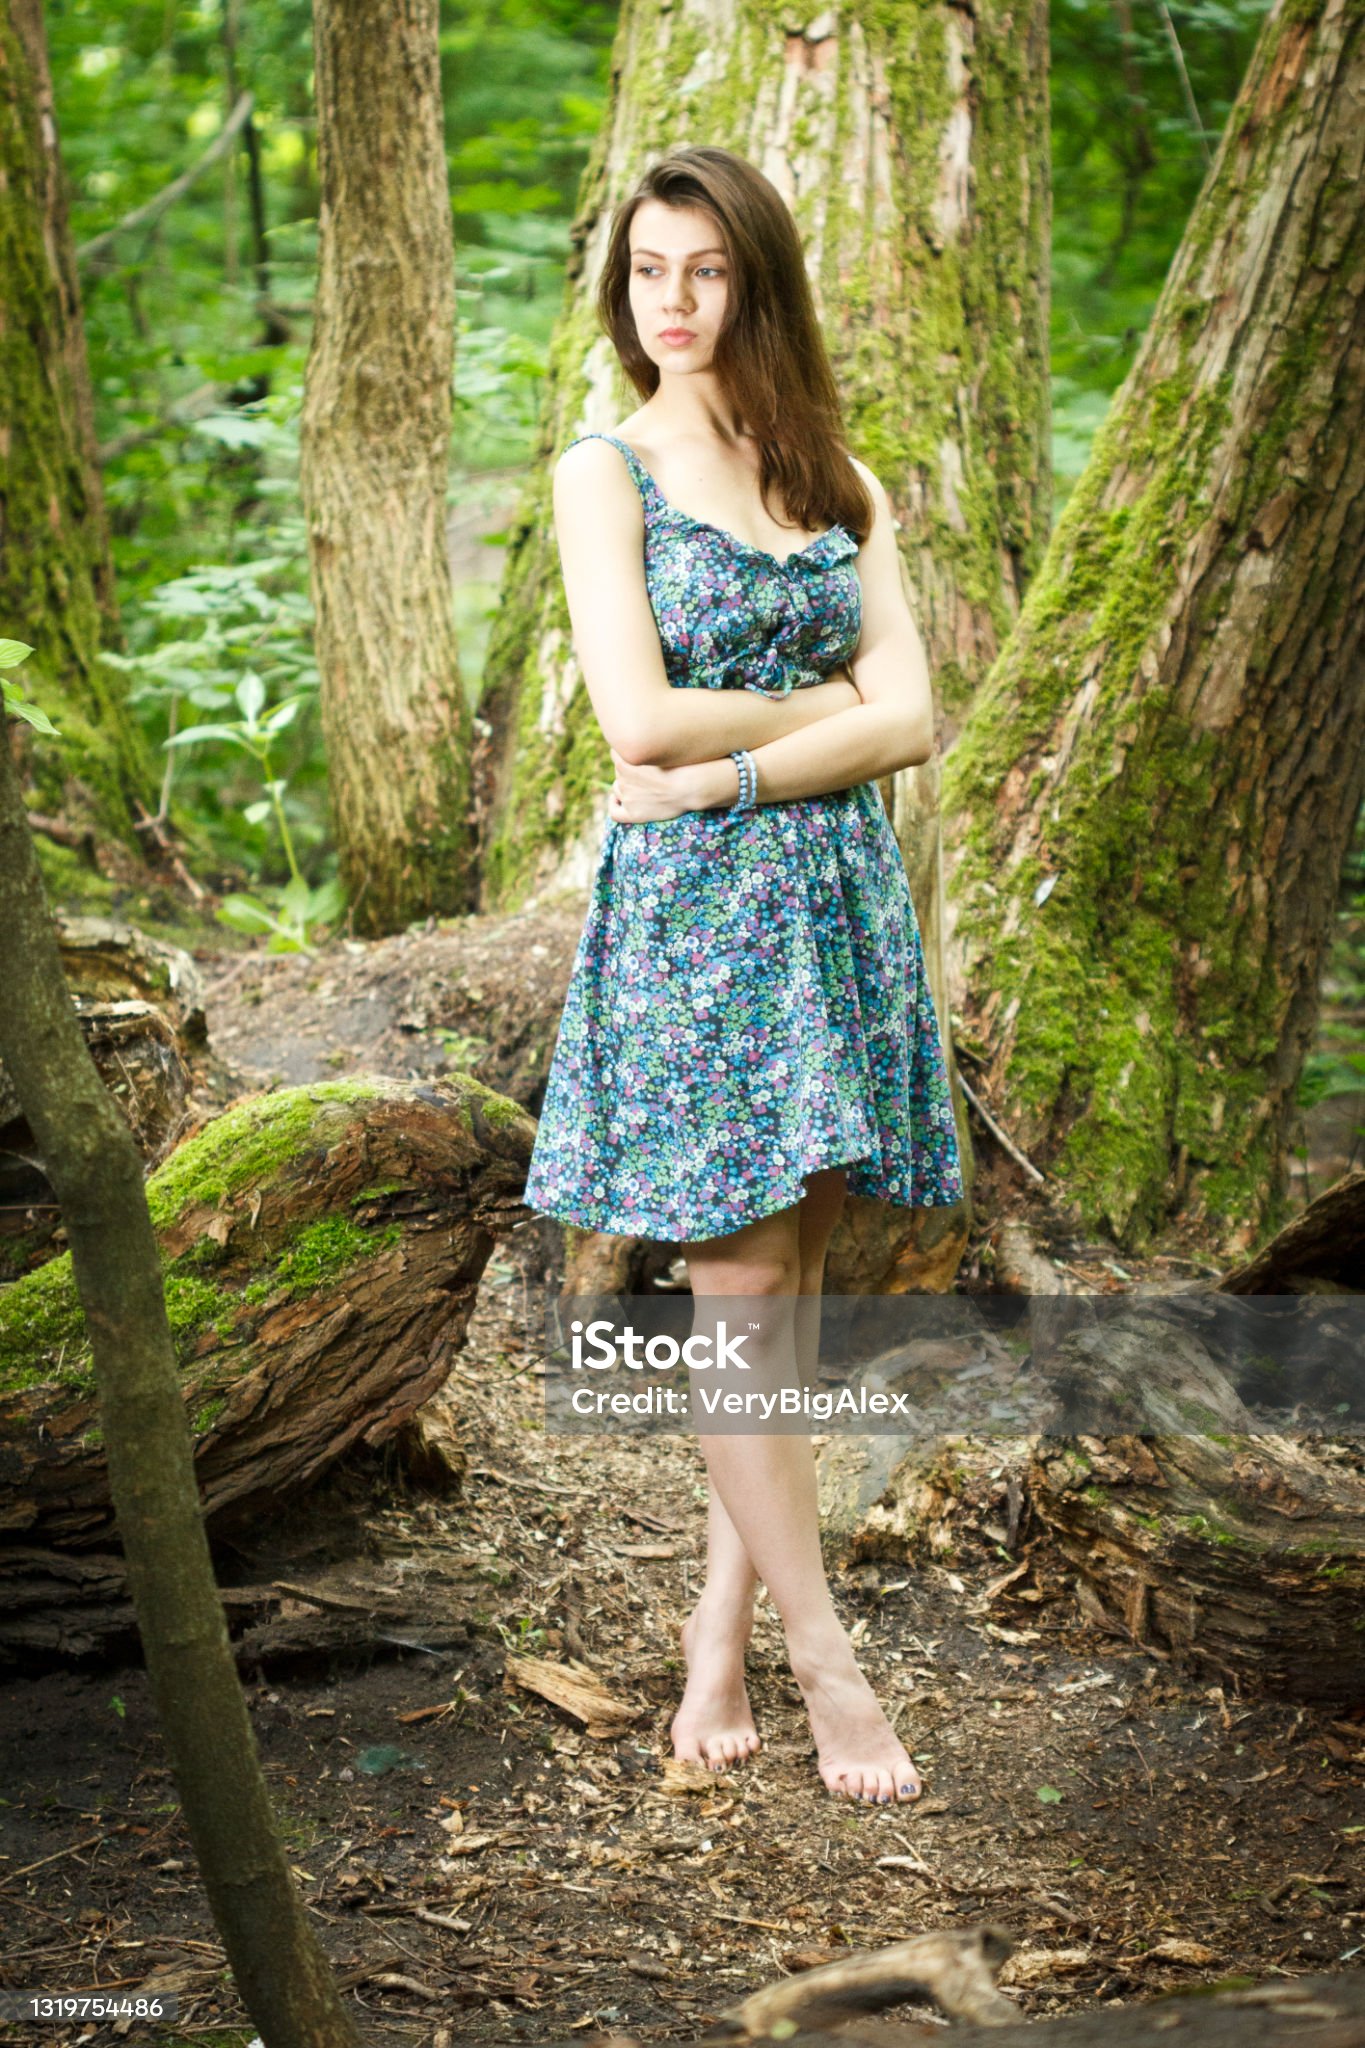 https://media.istockphoto.com/id/1319754486/photo/beautiful-young-woman-wearing-elegant-white-dress-walking-on-a-forest-path-with-rays-of.jpg?s=2048x2048&amp;w=is&amp;k=20&amp;c=eSPzZxTJWq7TlXn5XL4Bwkc7ice90QUg3H0kRcn6oJQ=